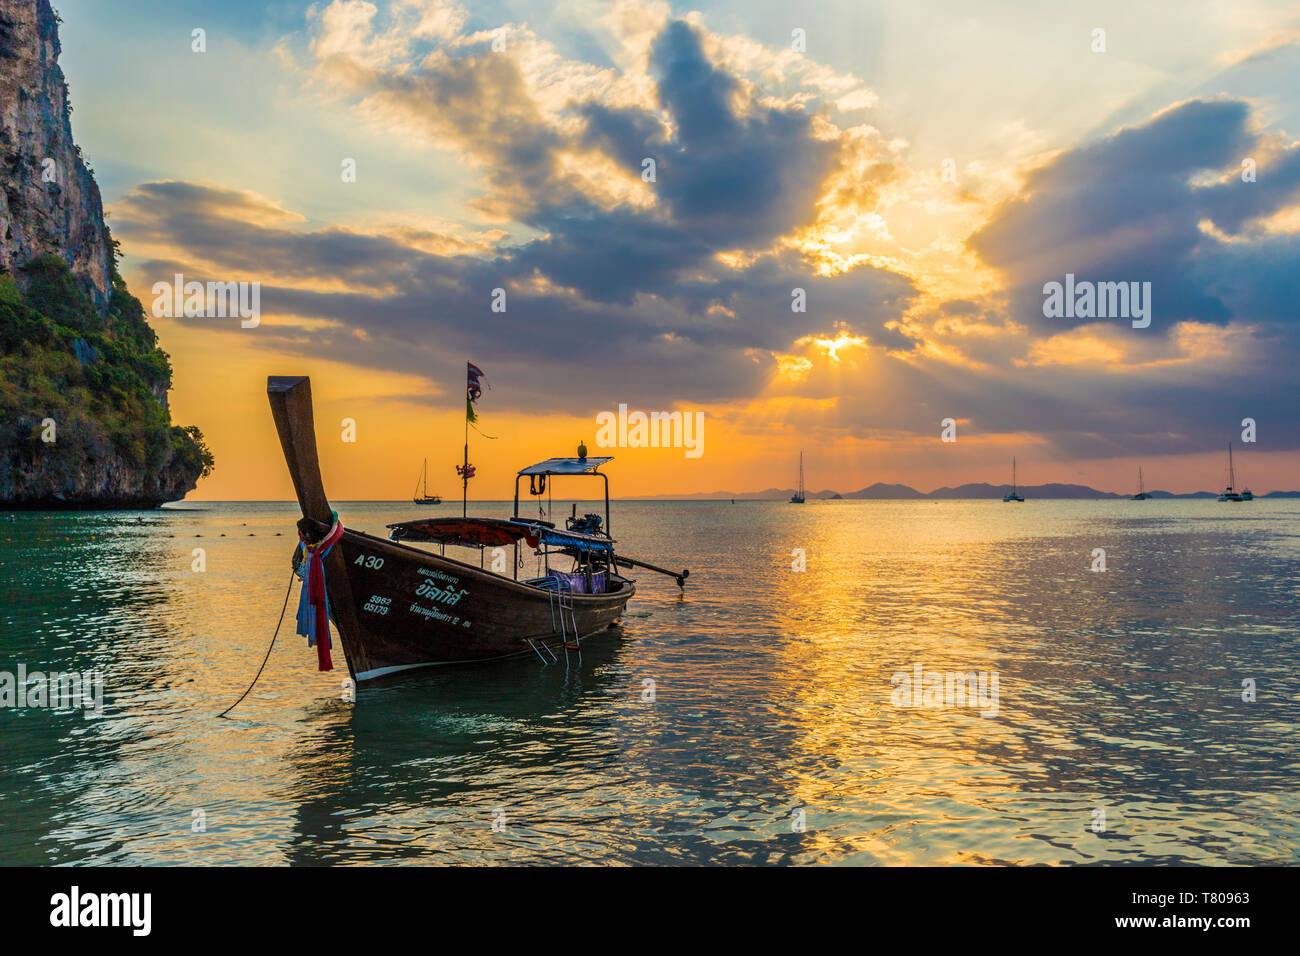 A long tail boat at sunset on Railay beach in Railay, Ao Nang, Krabi Province, Thailand, Southeast Asia, Asia Stock Photo